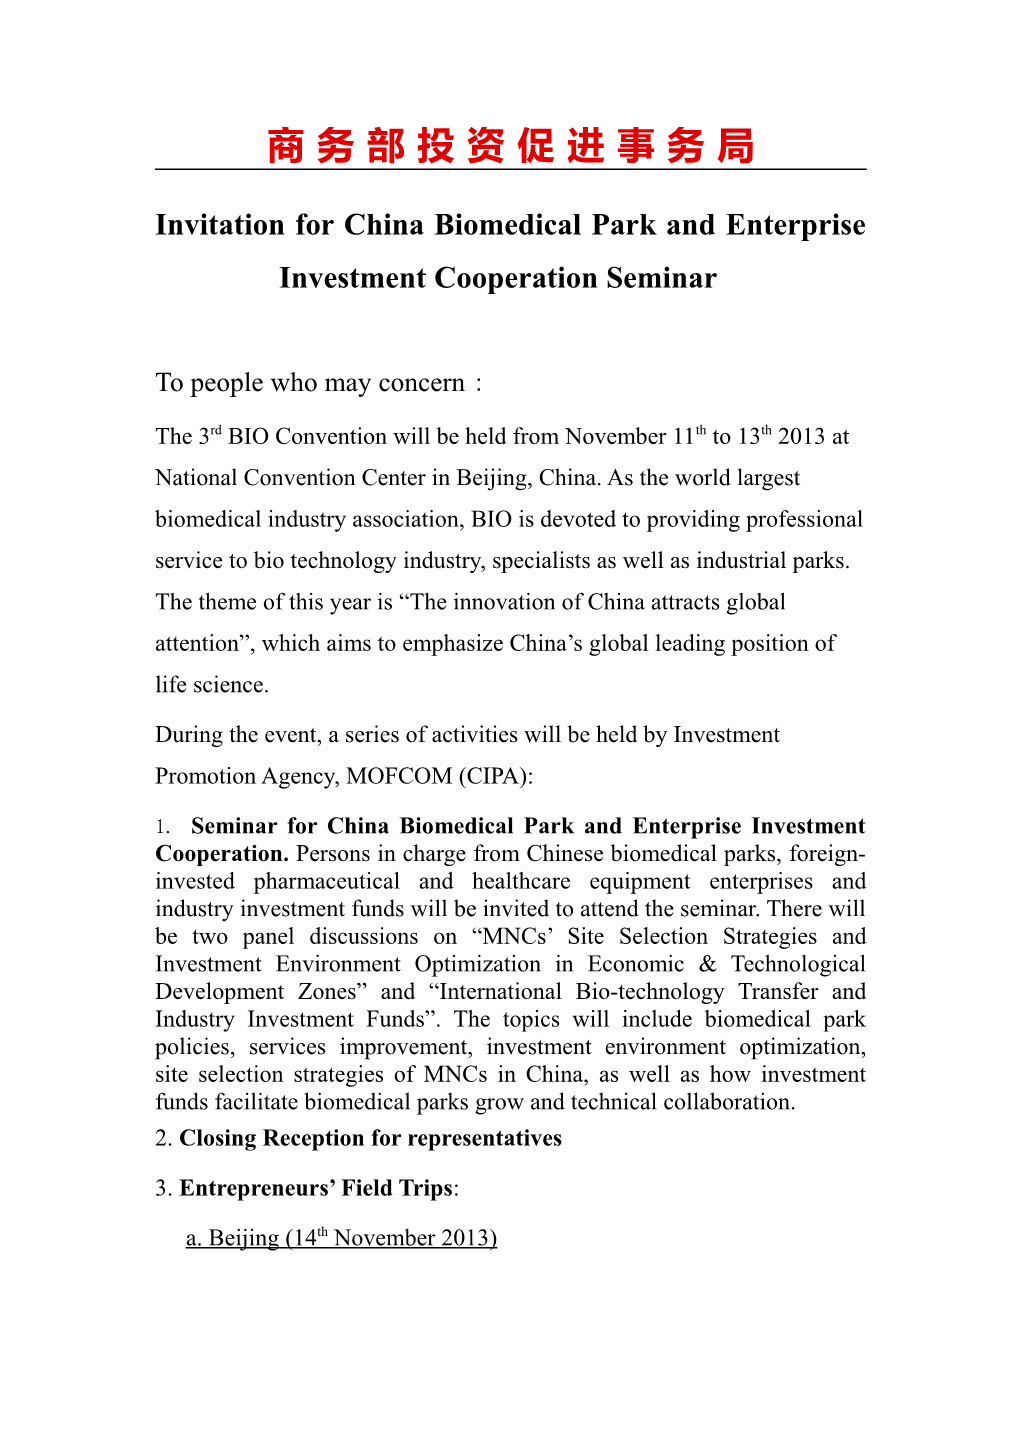 Invitation for China Biomedical Park and Enterprise Investment Cooperation Seminar